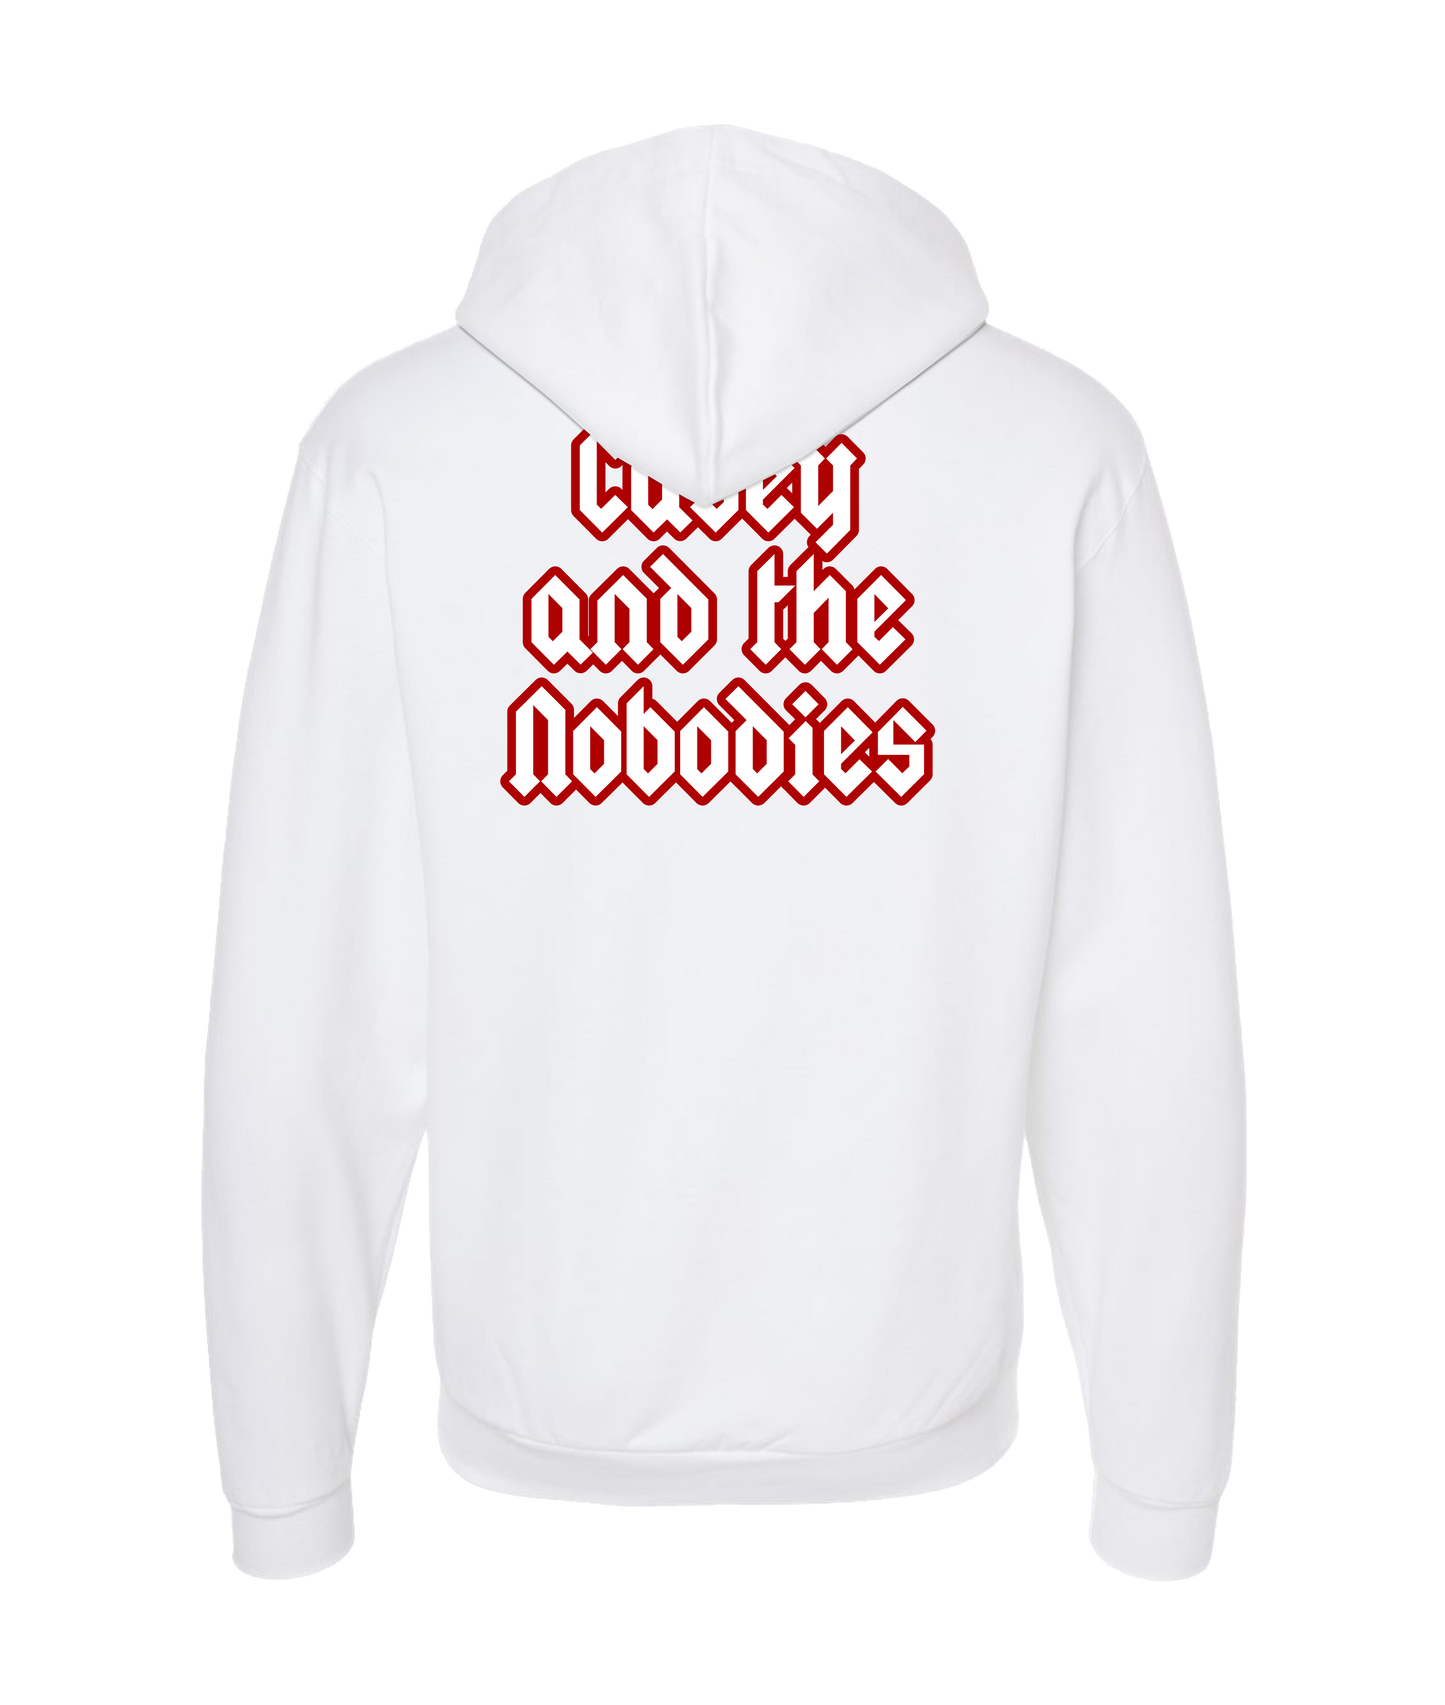 Casey and the Nobodies
 - Logo - White Zip Up Hoodie